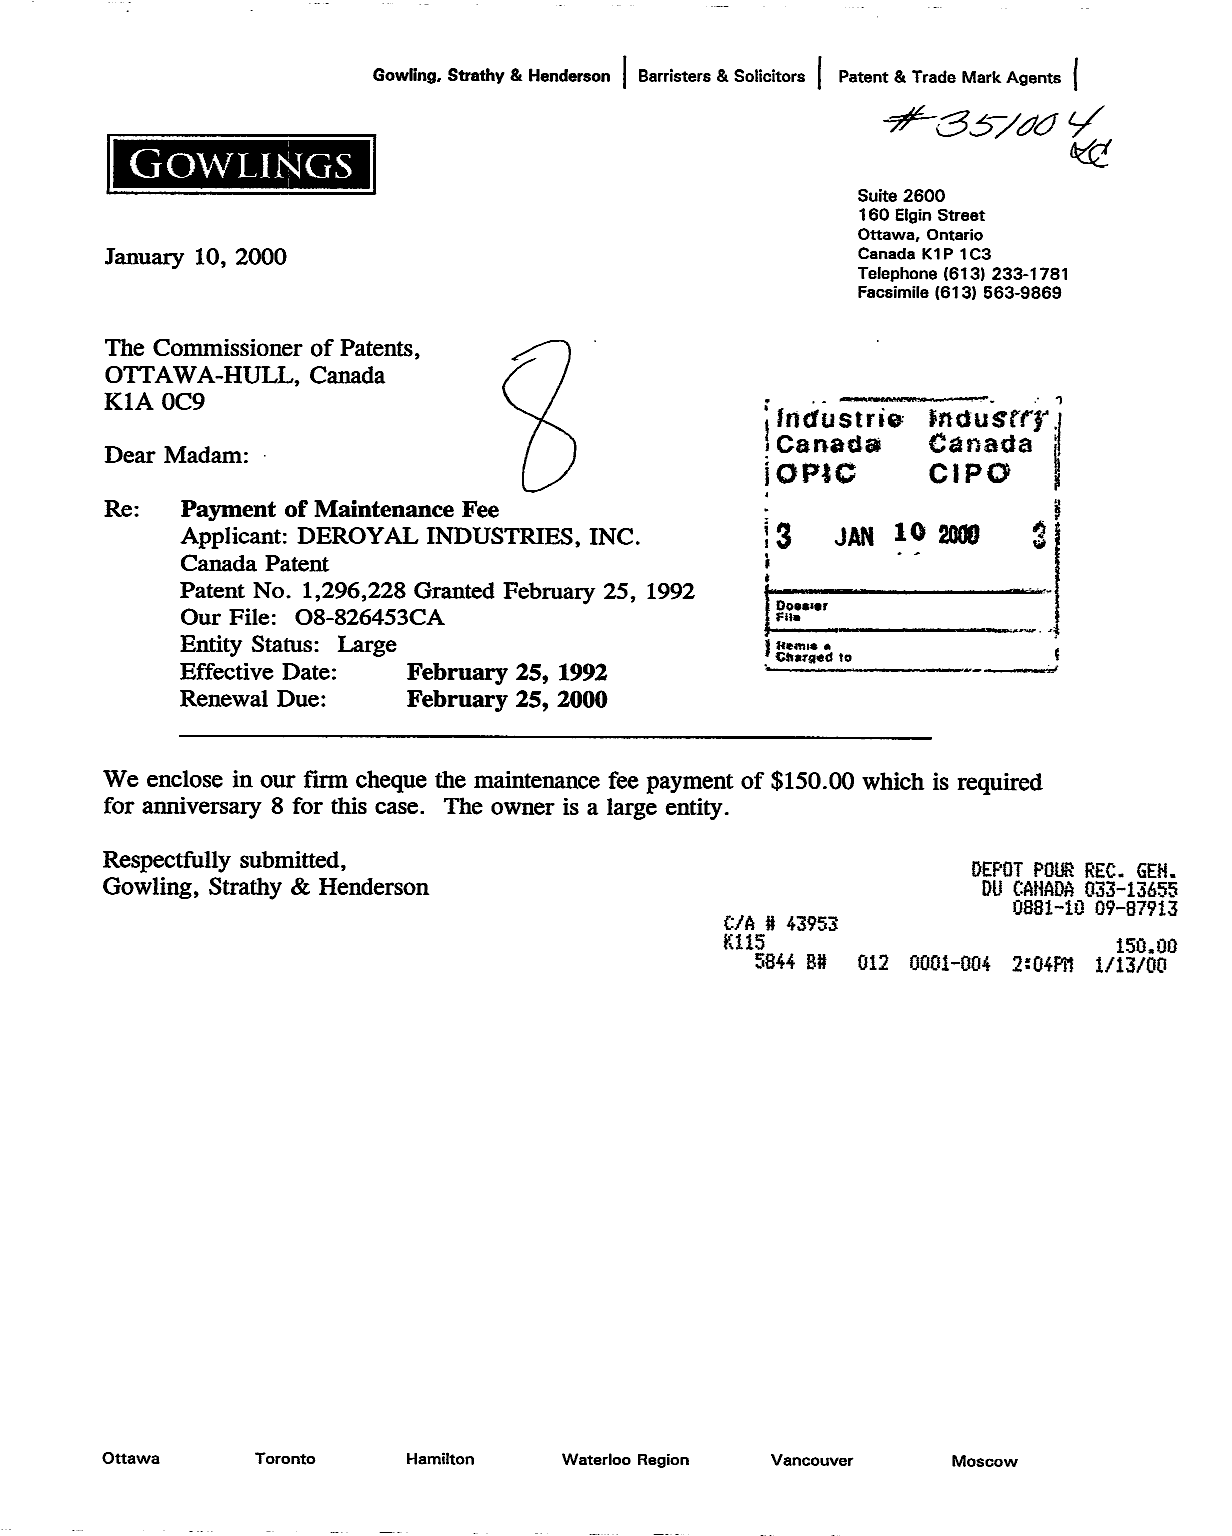 Canadian Patent Document 1296228. Fees 20000110. Image 1 of 1